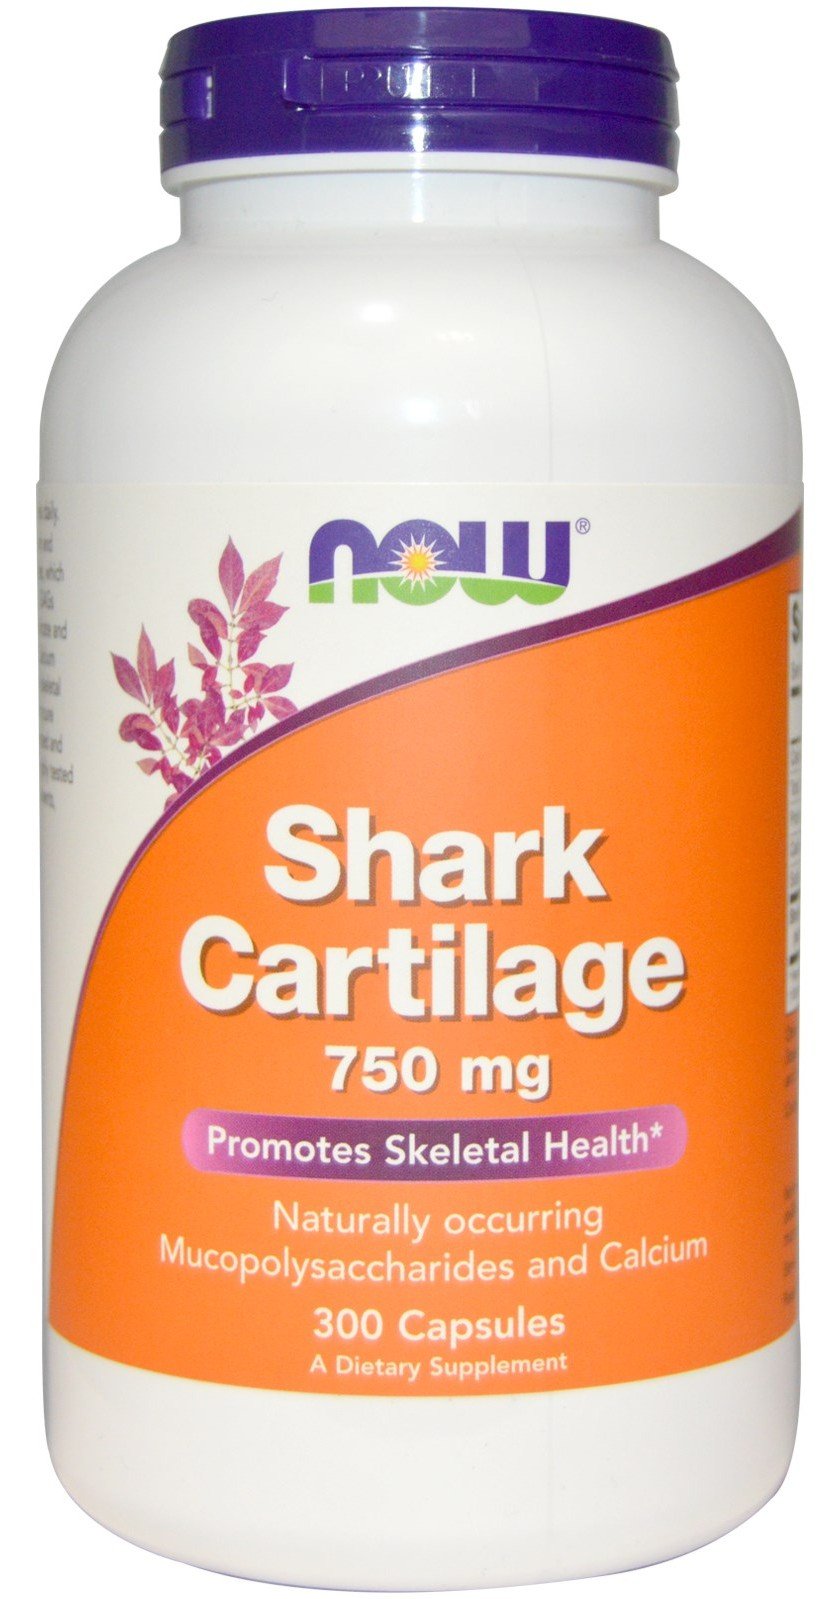 Shark Cartilage 750 mg, 300 pcs, Now. Special supplements. 